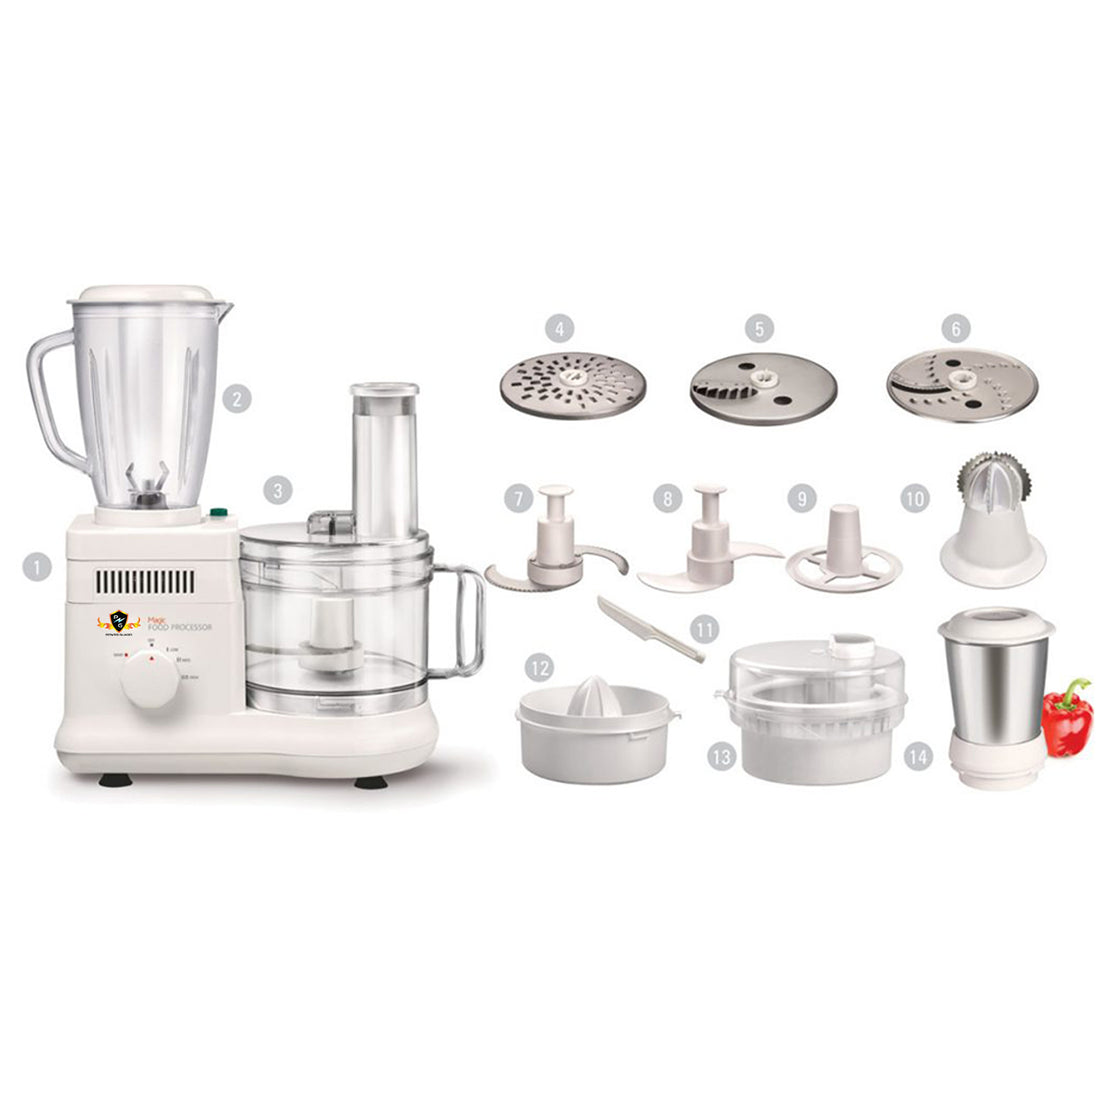 The Best Food Processor Brands for Your Kitchen